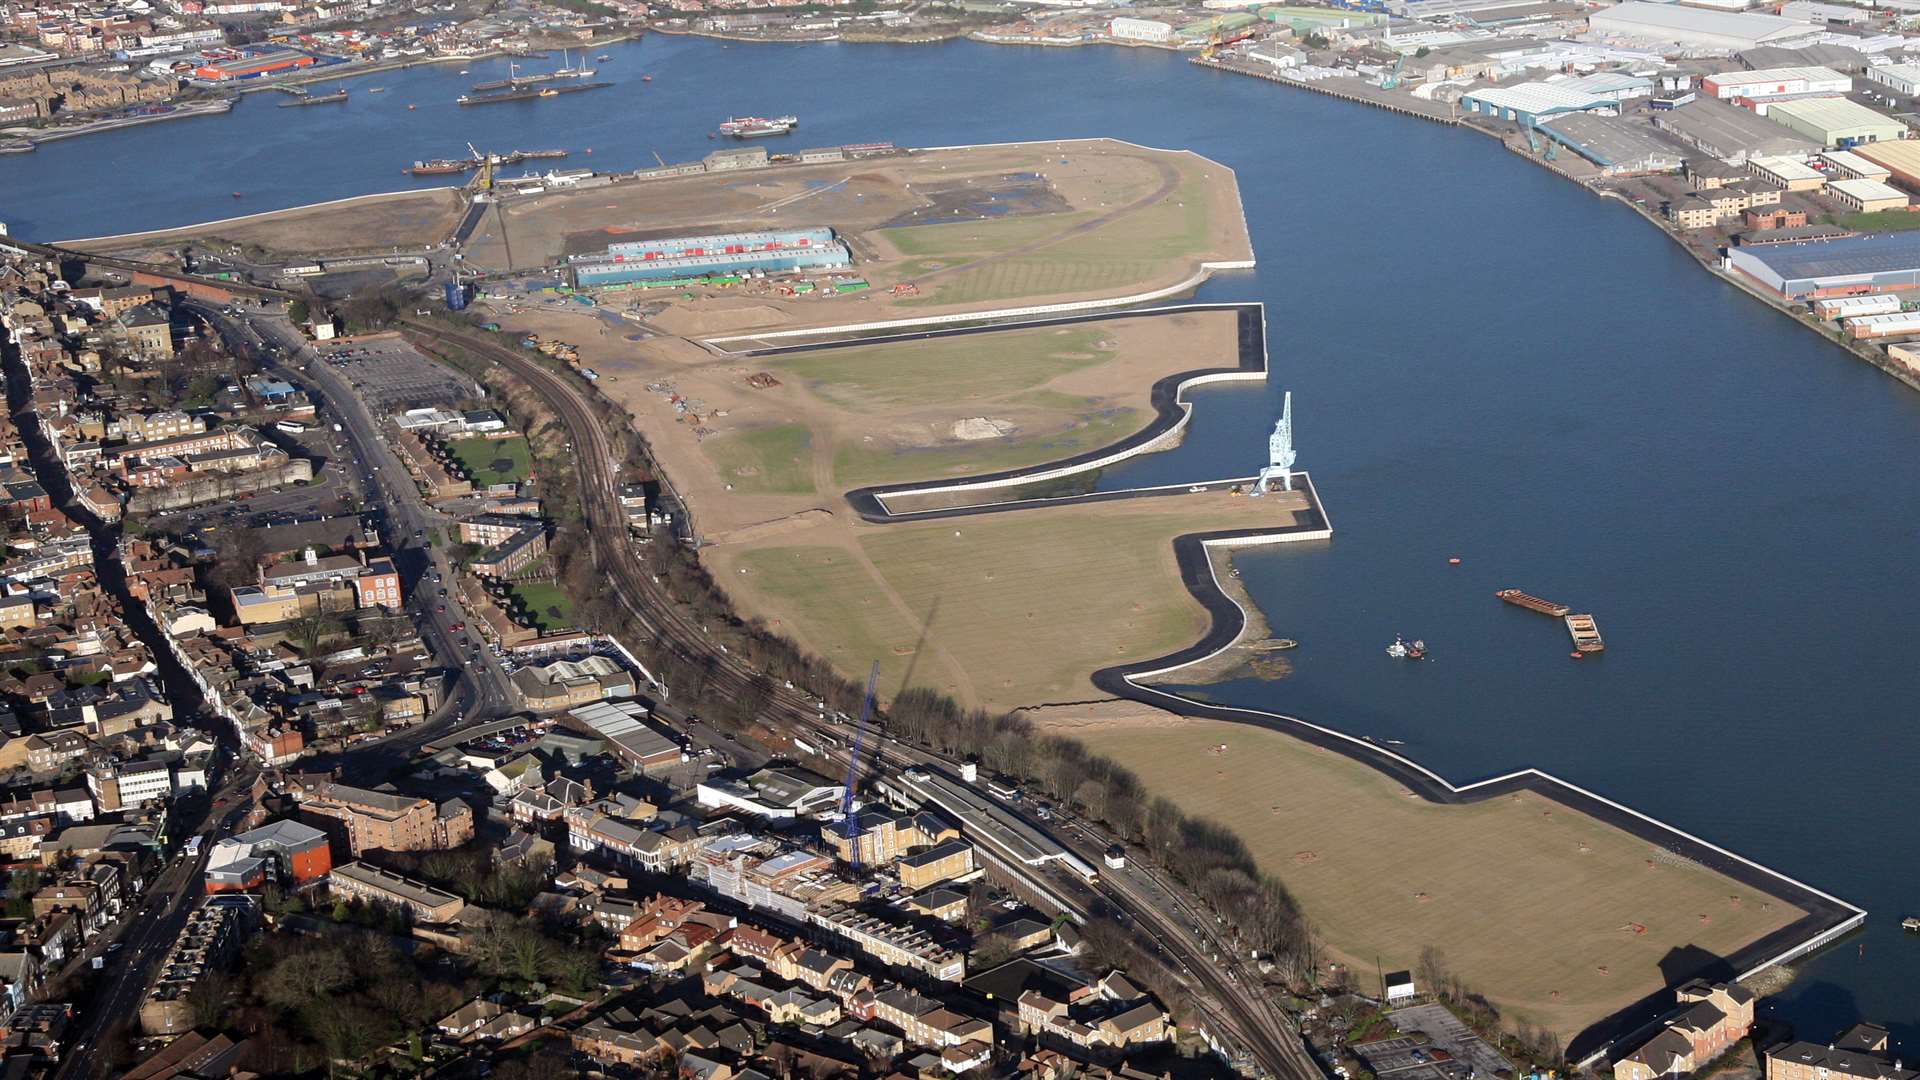 The Rochester Riverside area in 2014 which is being redeveloped